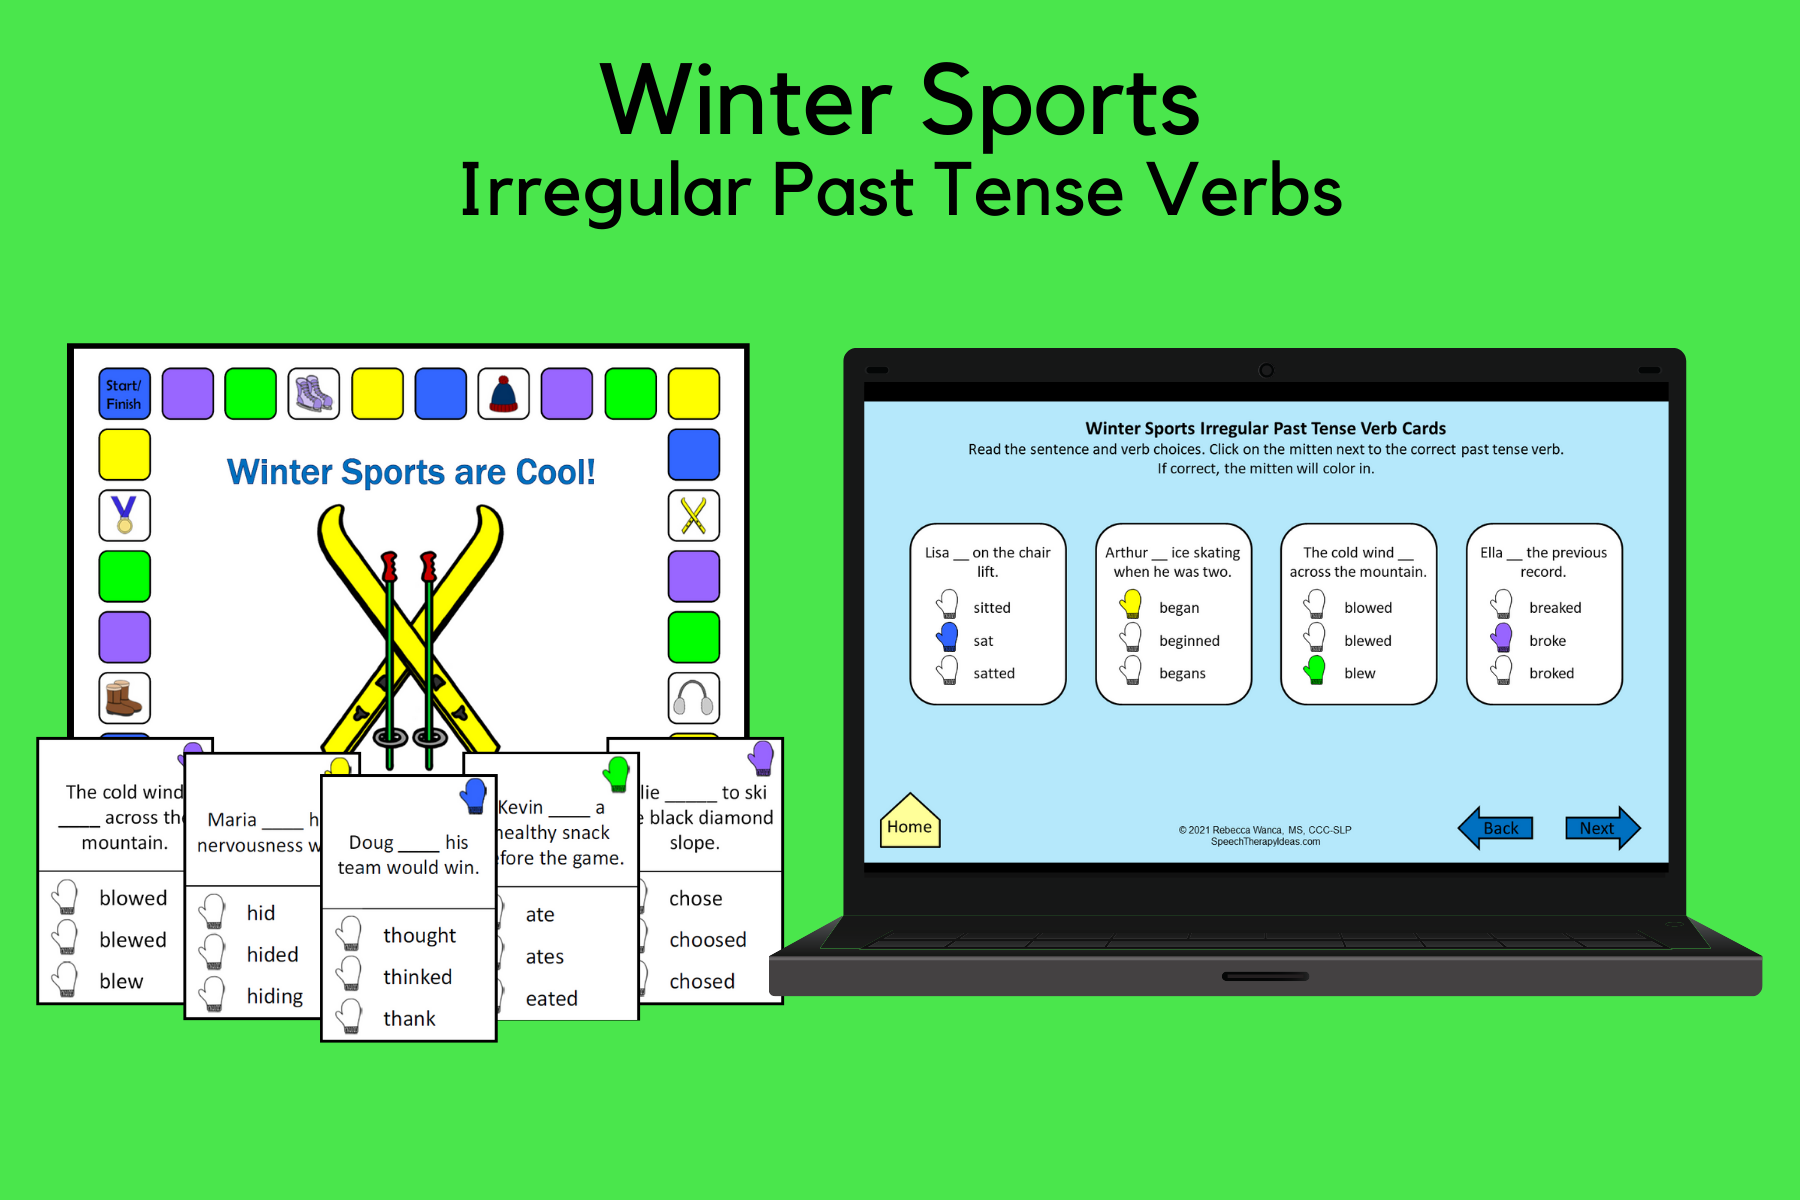 Winter Sports Irregular Verb Tense Cards and Game